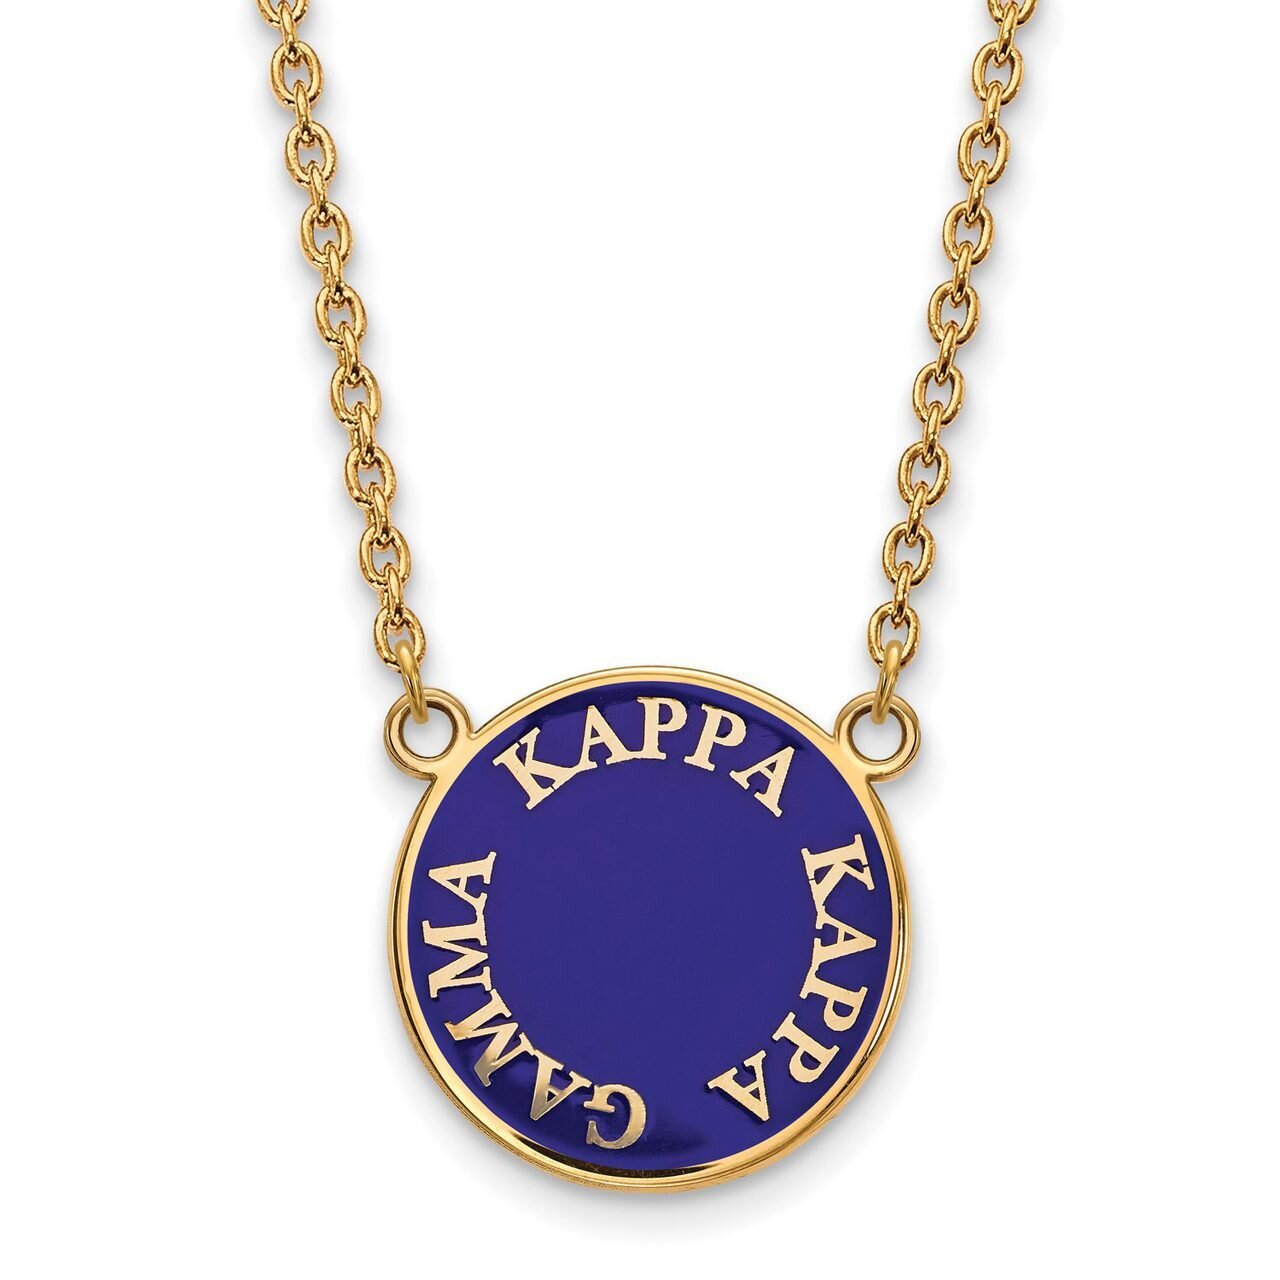 Kappa Kappa Gamma Small Enameled Pendant with 18 Inch Chain Gold-plated Silver GP013KKG-18